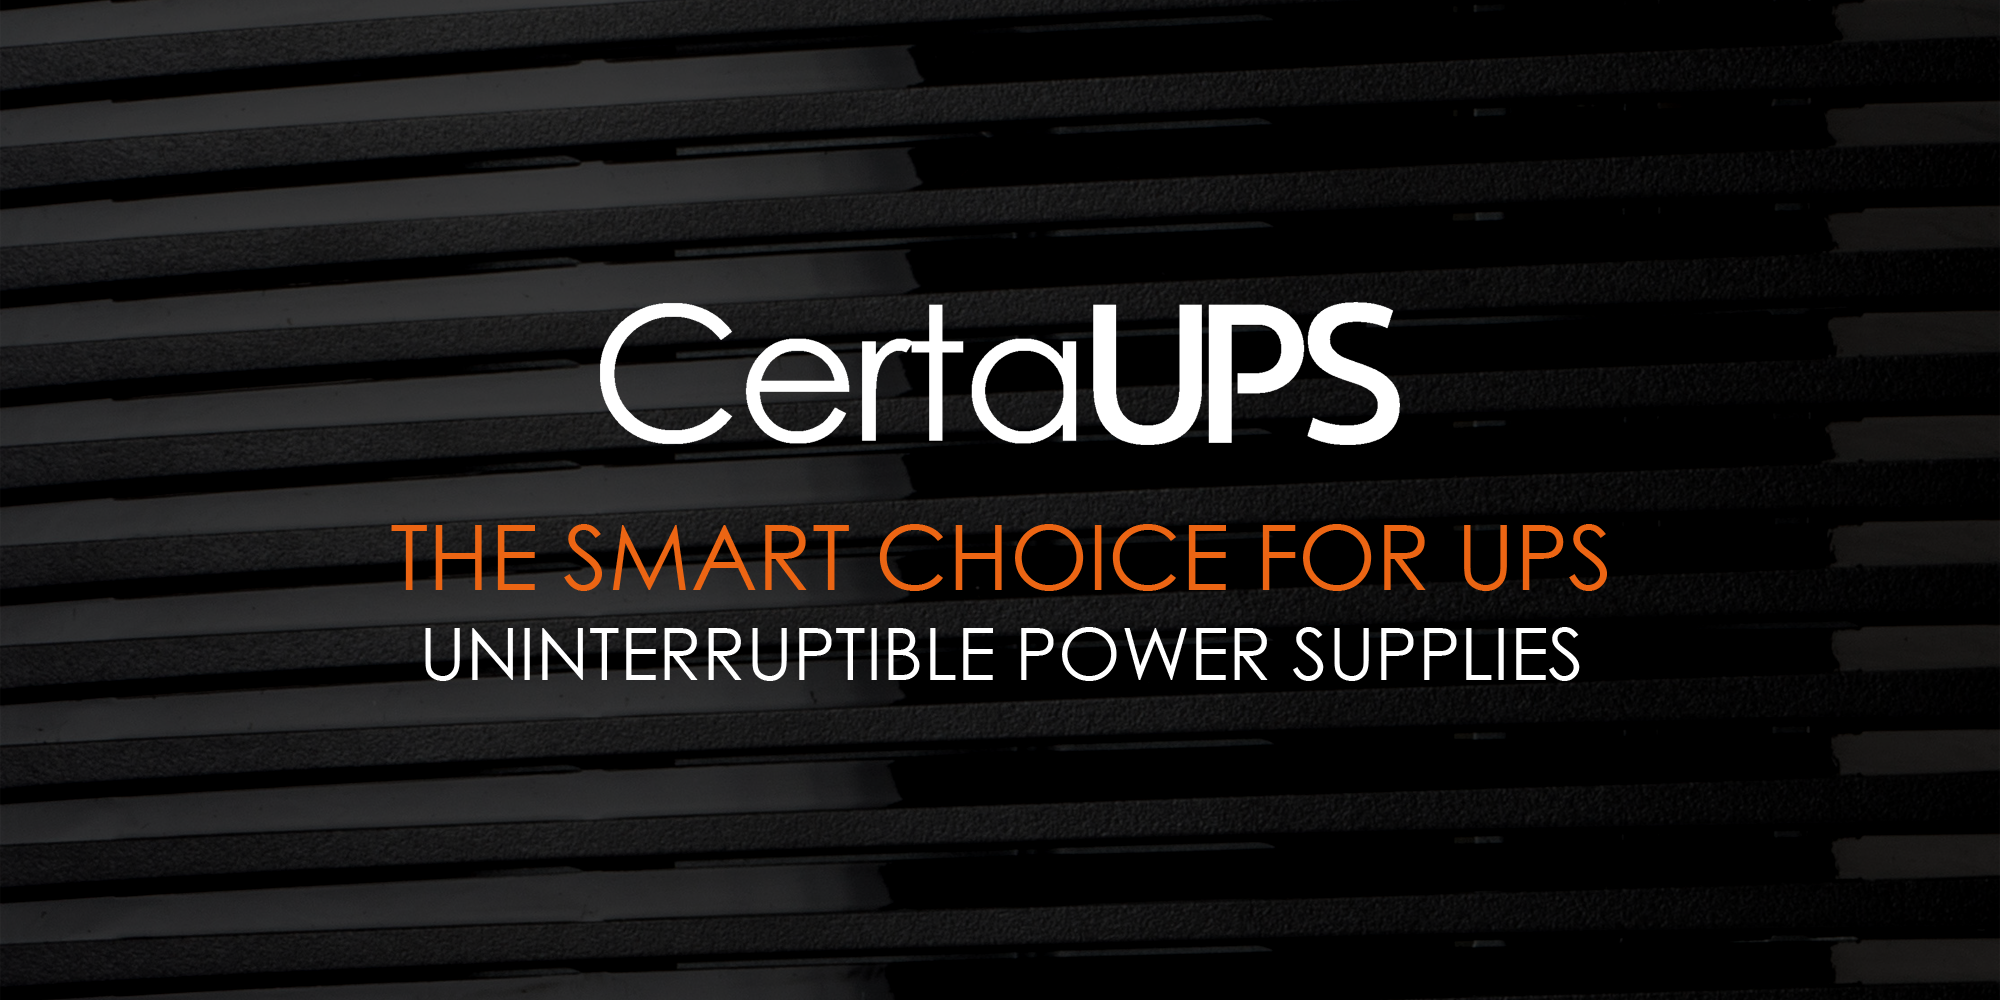 Building the CertaUPS brand from the ground up to ignite success - Fenti Marketing